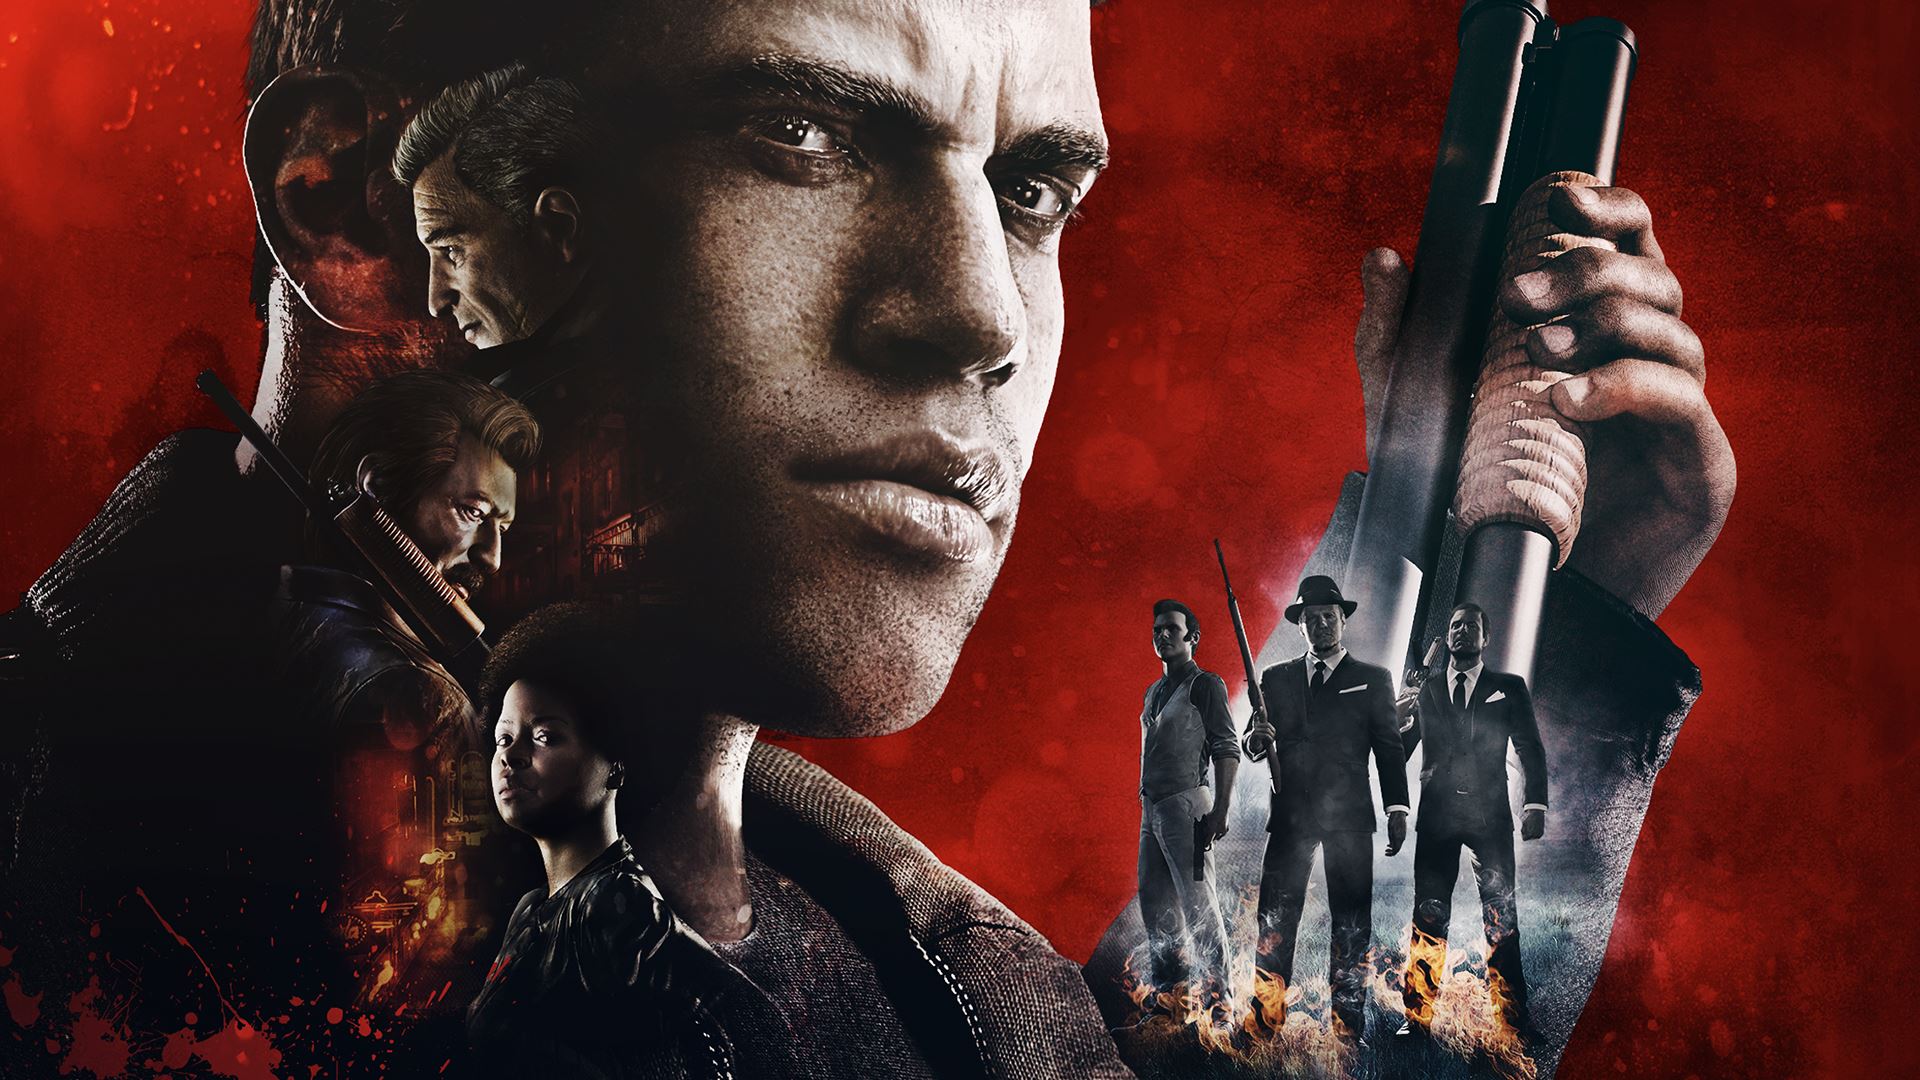 Image for Mafia 3 is 2K's fastest-selling game ever, Take Two boss notes "anomalies in the review process"